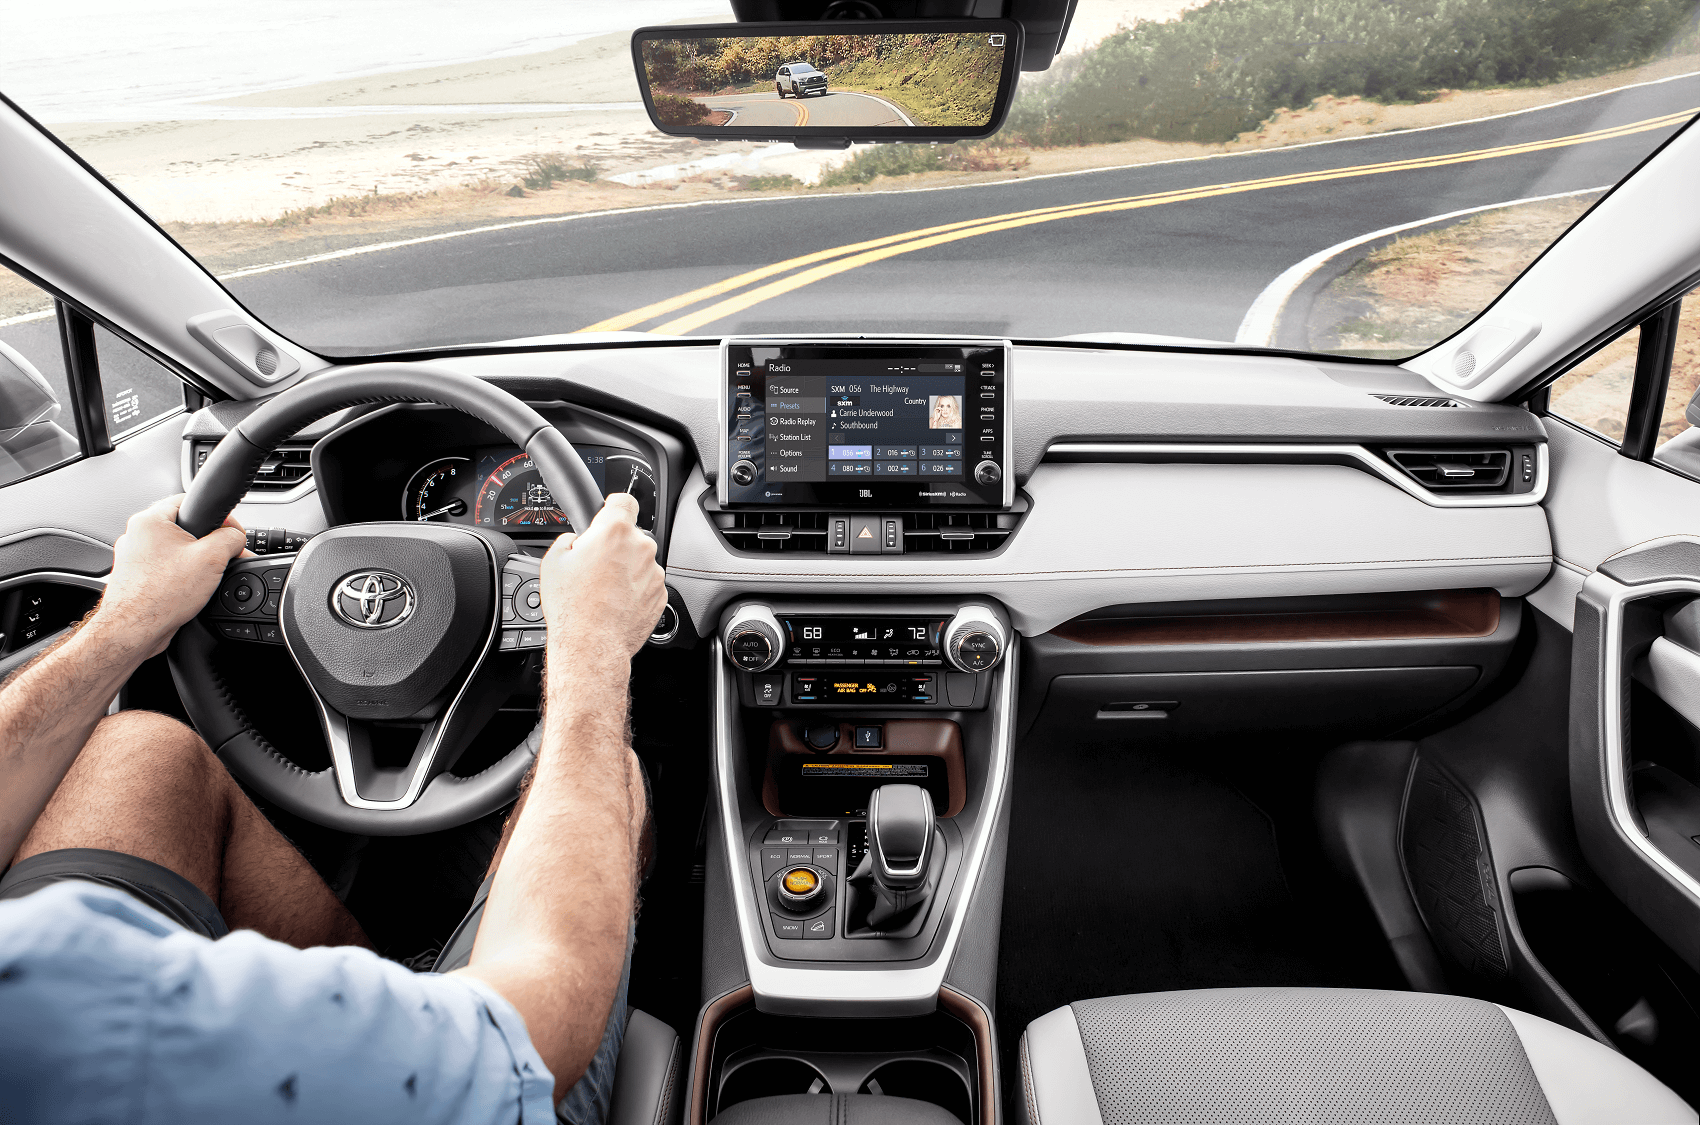 Get to Know the Toyota RAV4